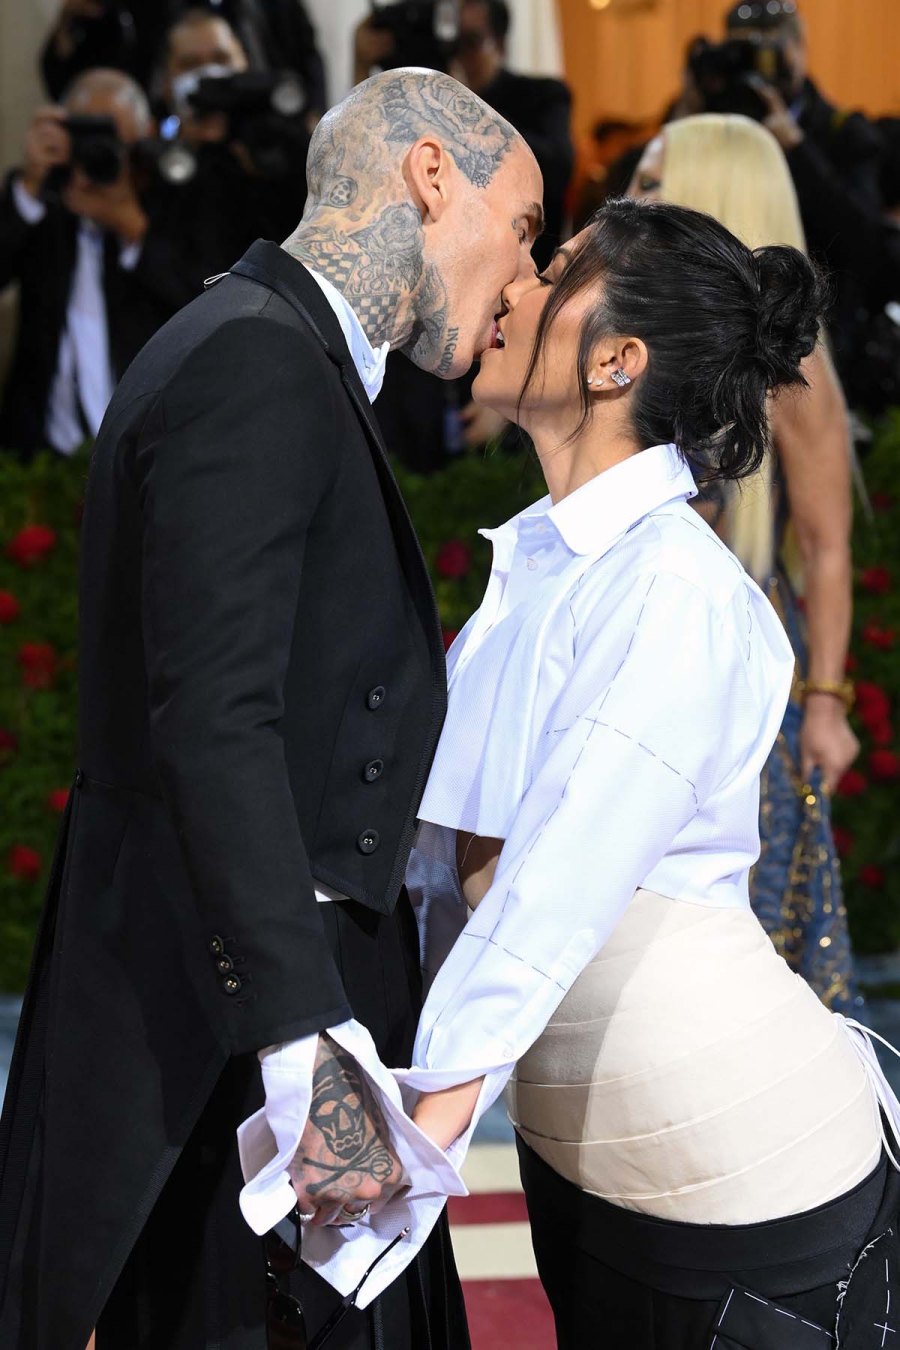 Kourtney Reveals She 'Blacked Out' During Las Vegas Wedding With Travis